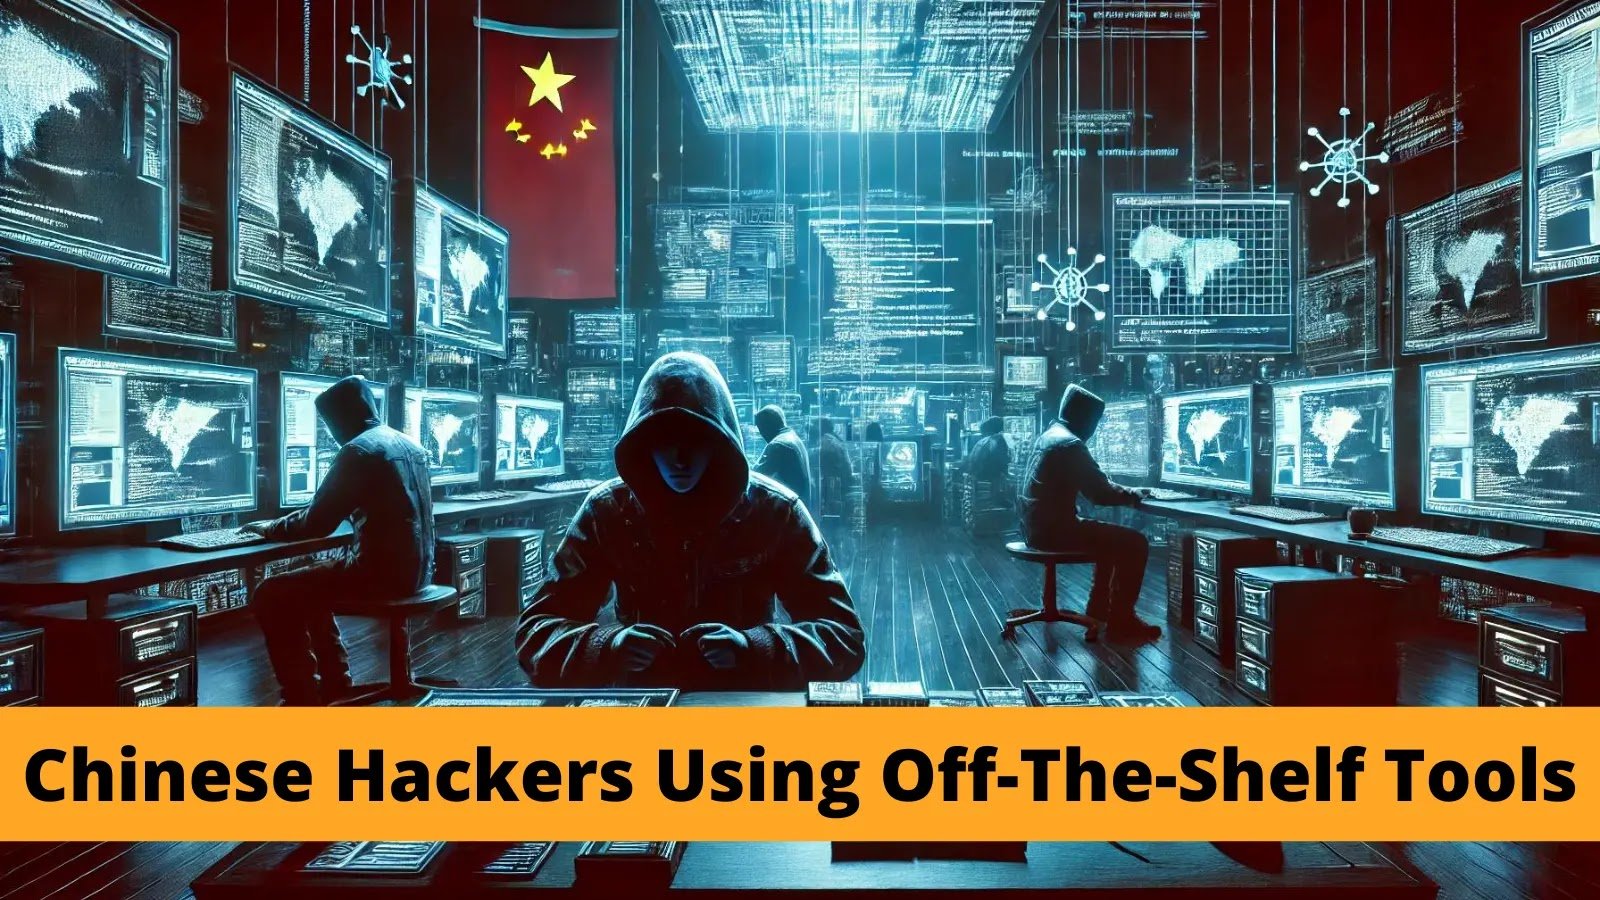 Chinese Hacker Groups Using Off-The-Shelf Tools To Deploy Ransomware